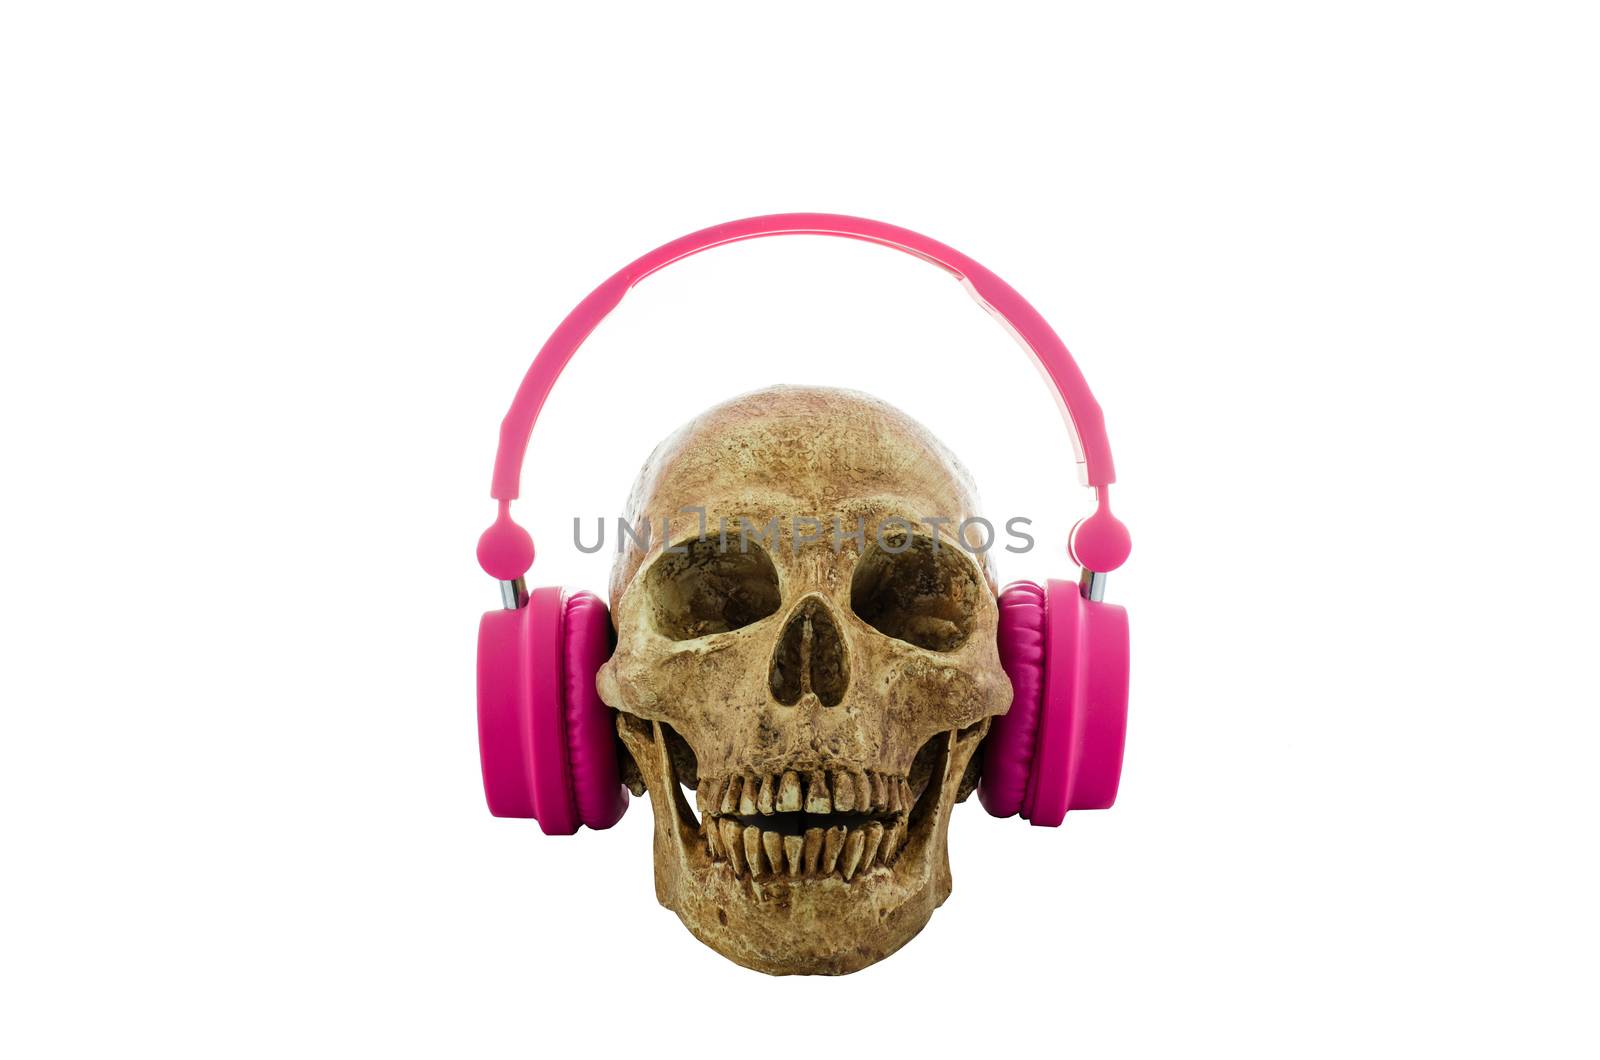 Skull with pink headphones isolated on white background